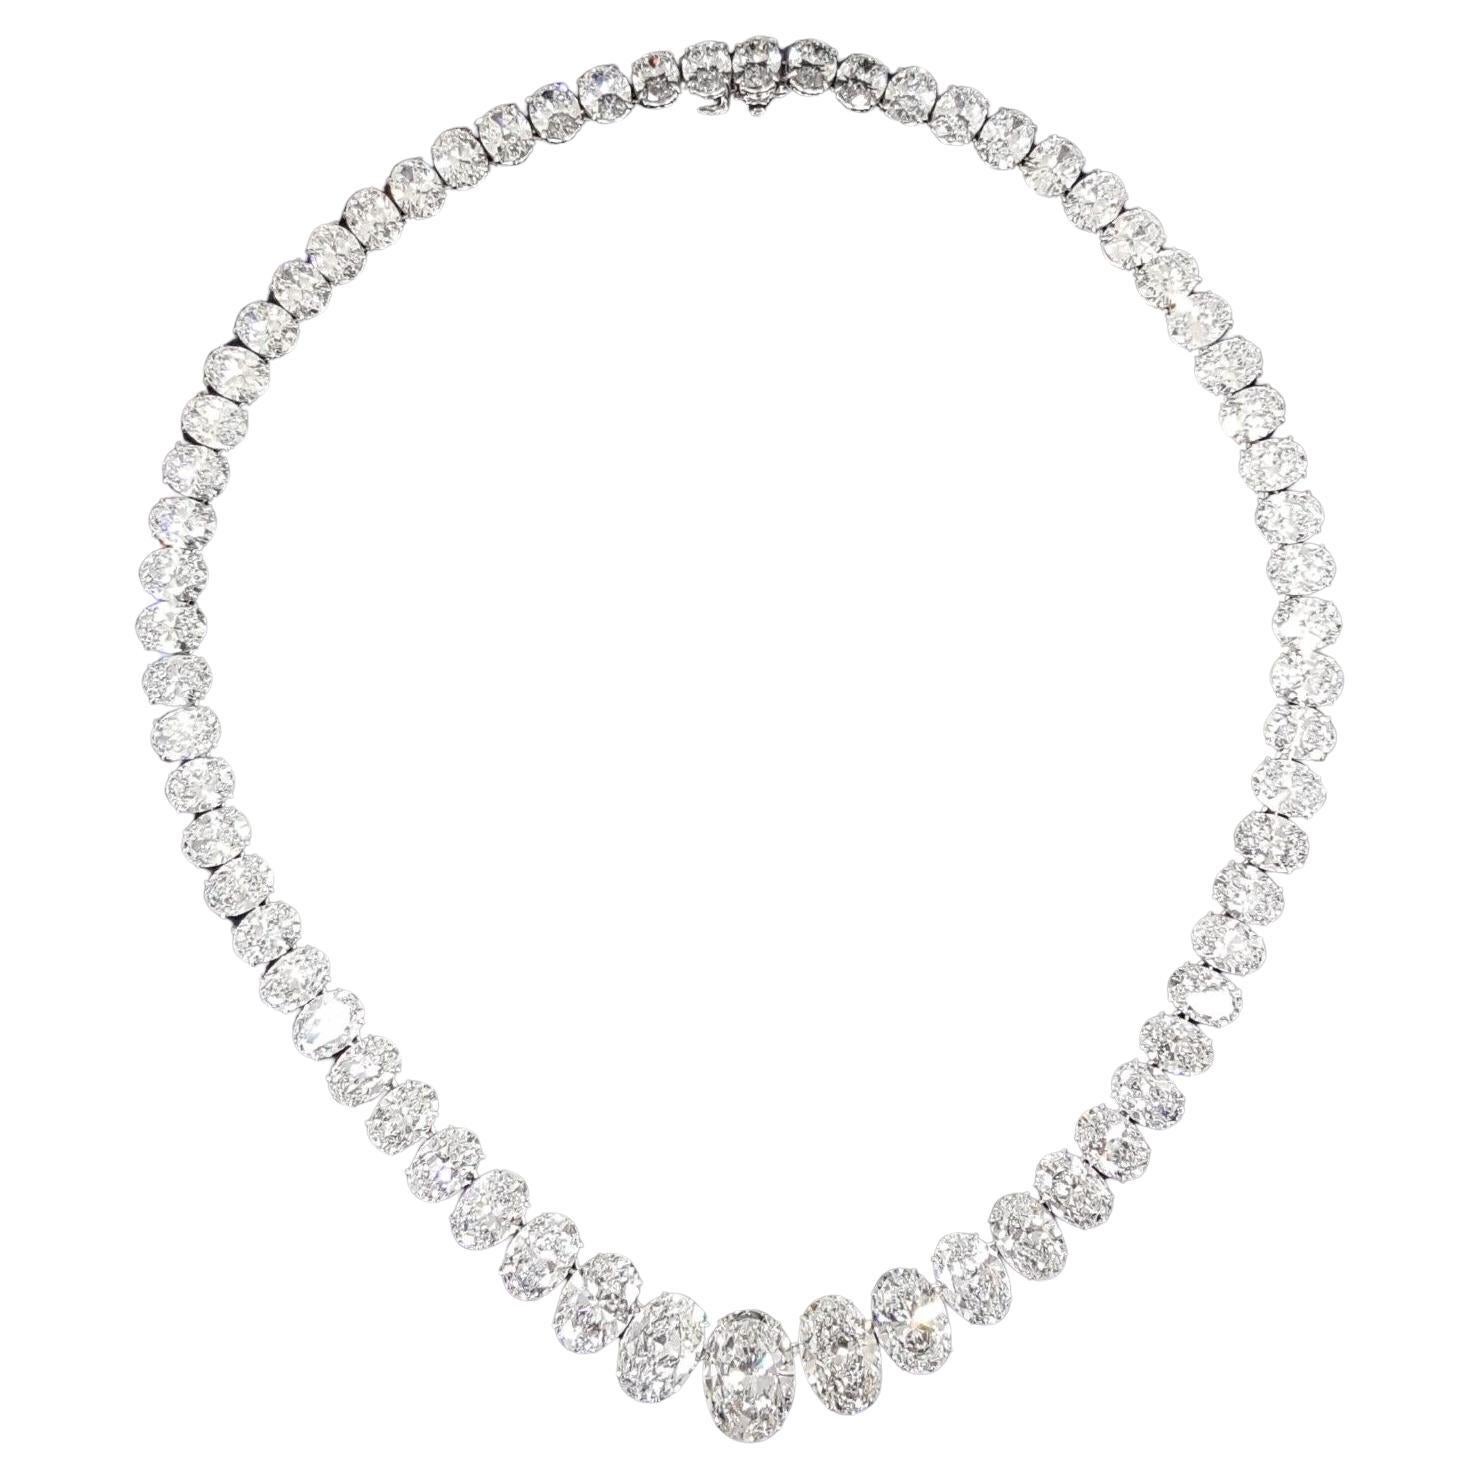 EXCEPTIONAL GIA Certified 85 Carat Flawless Clarity D Color Diamond Necklace